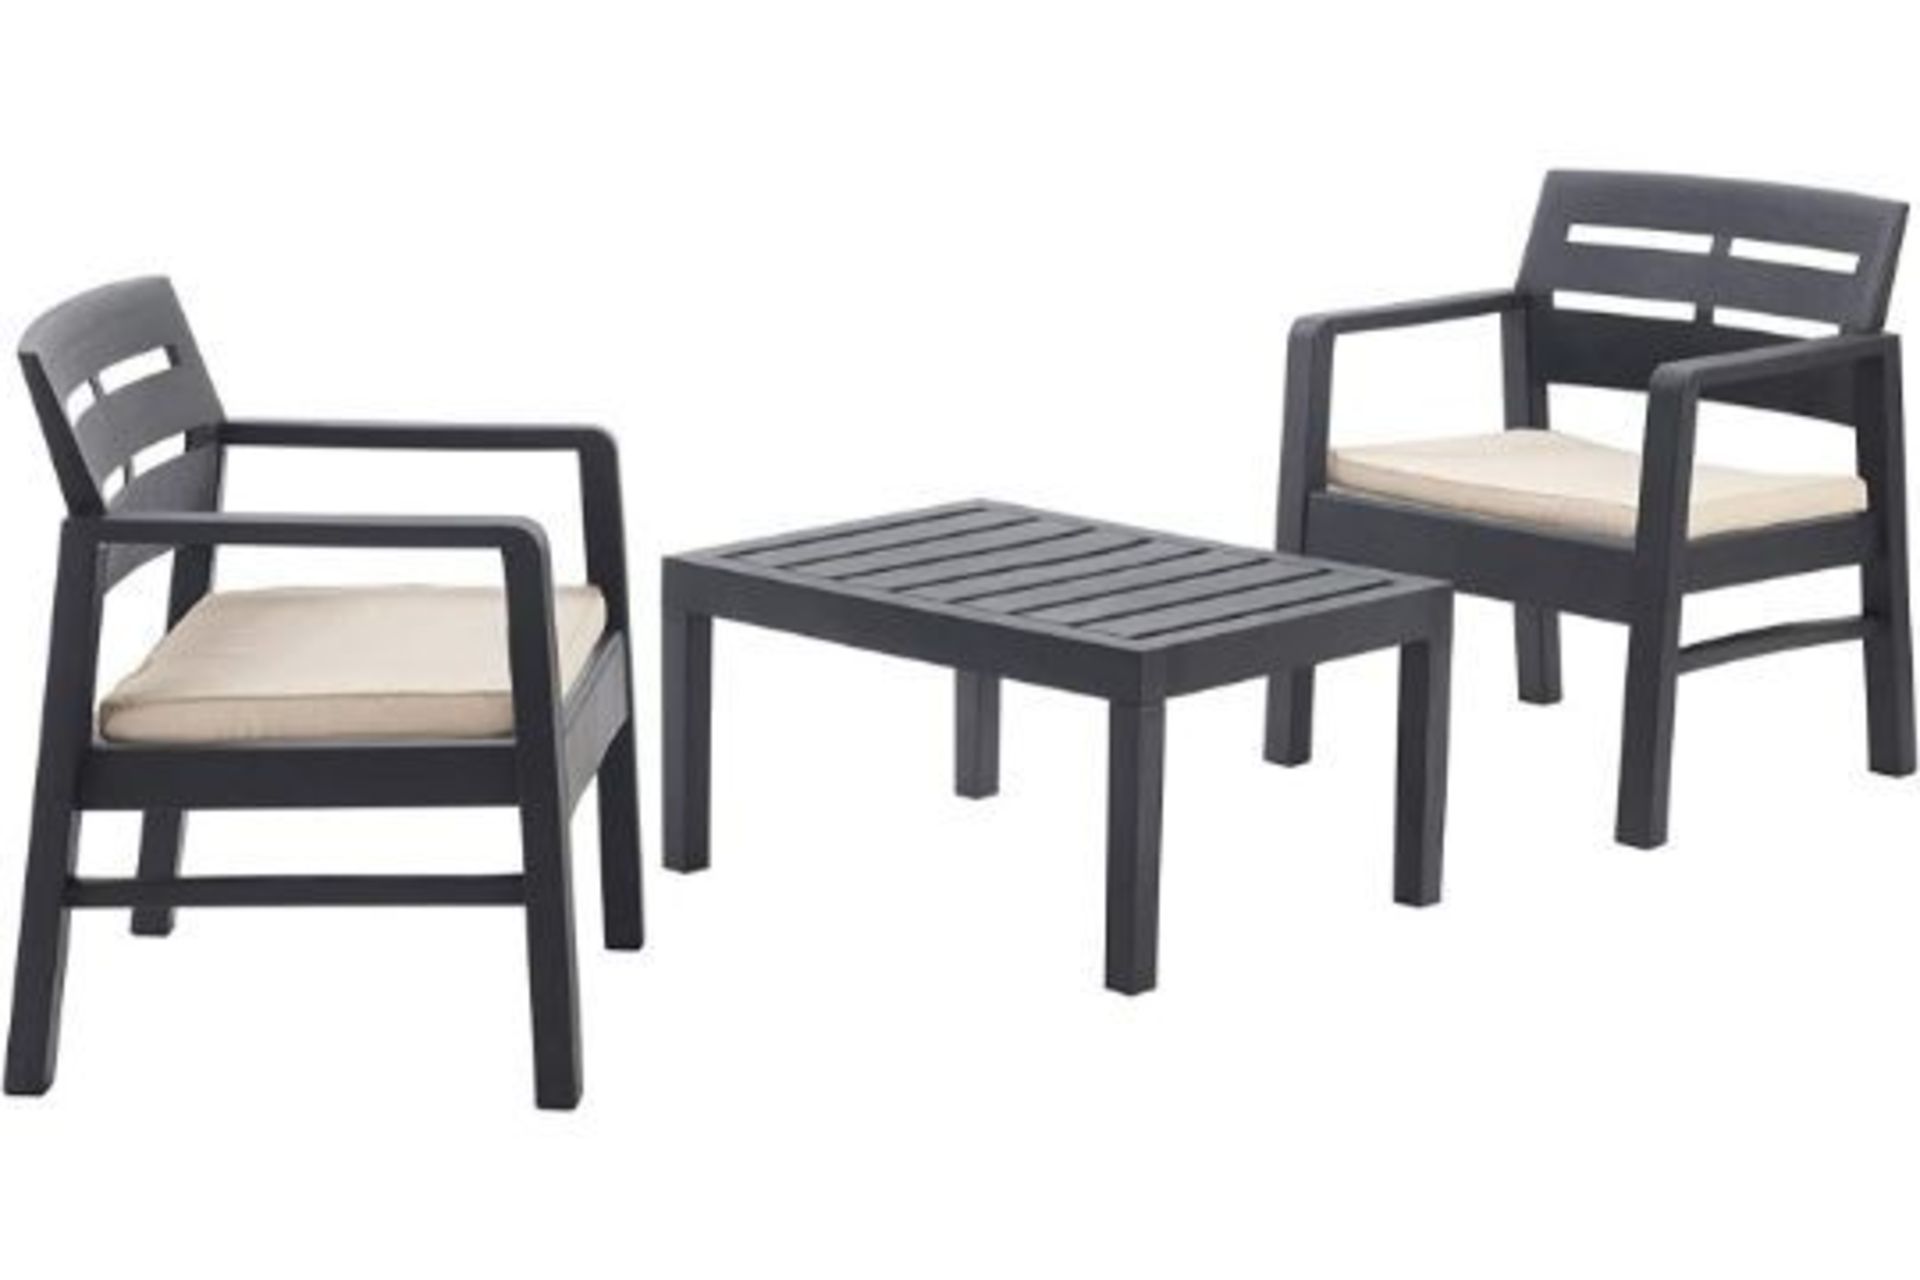 2 X BRAND NEW IPAE WOOD GRAIN EFFECT GARDEN FURNITURE SET WITH TABLE AND 2 LARGE ARM CHAIRS PATIO